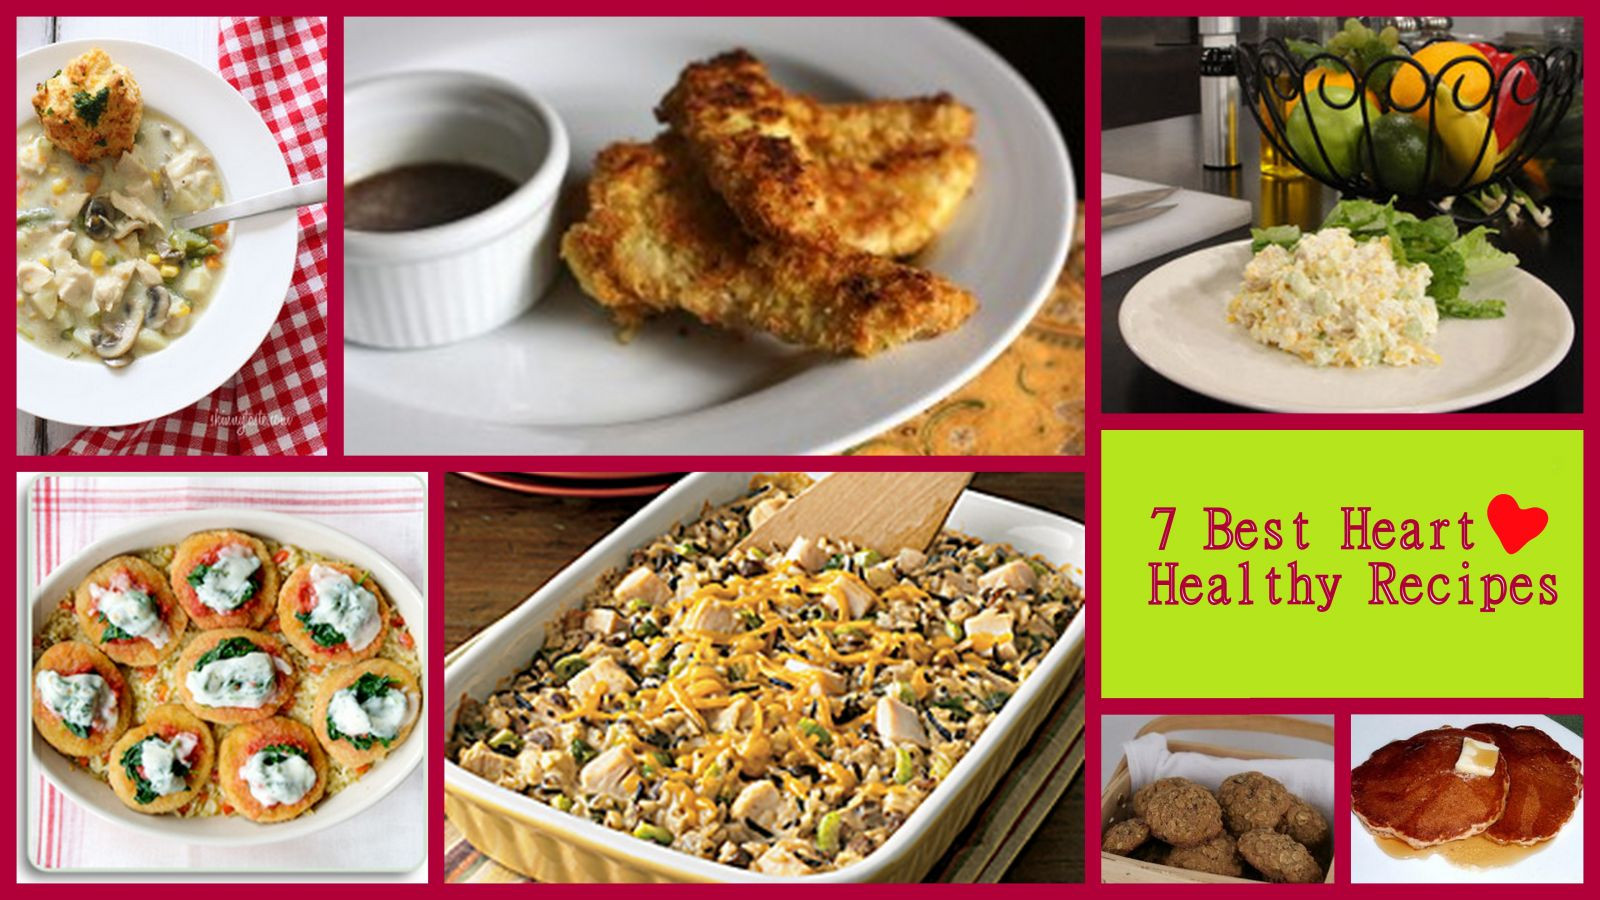 Heart Healthy Lunch Recipes
 7 Best Heart Healthy Recipes